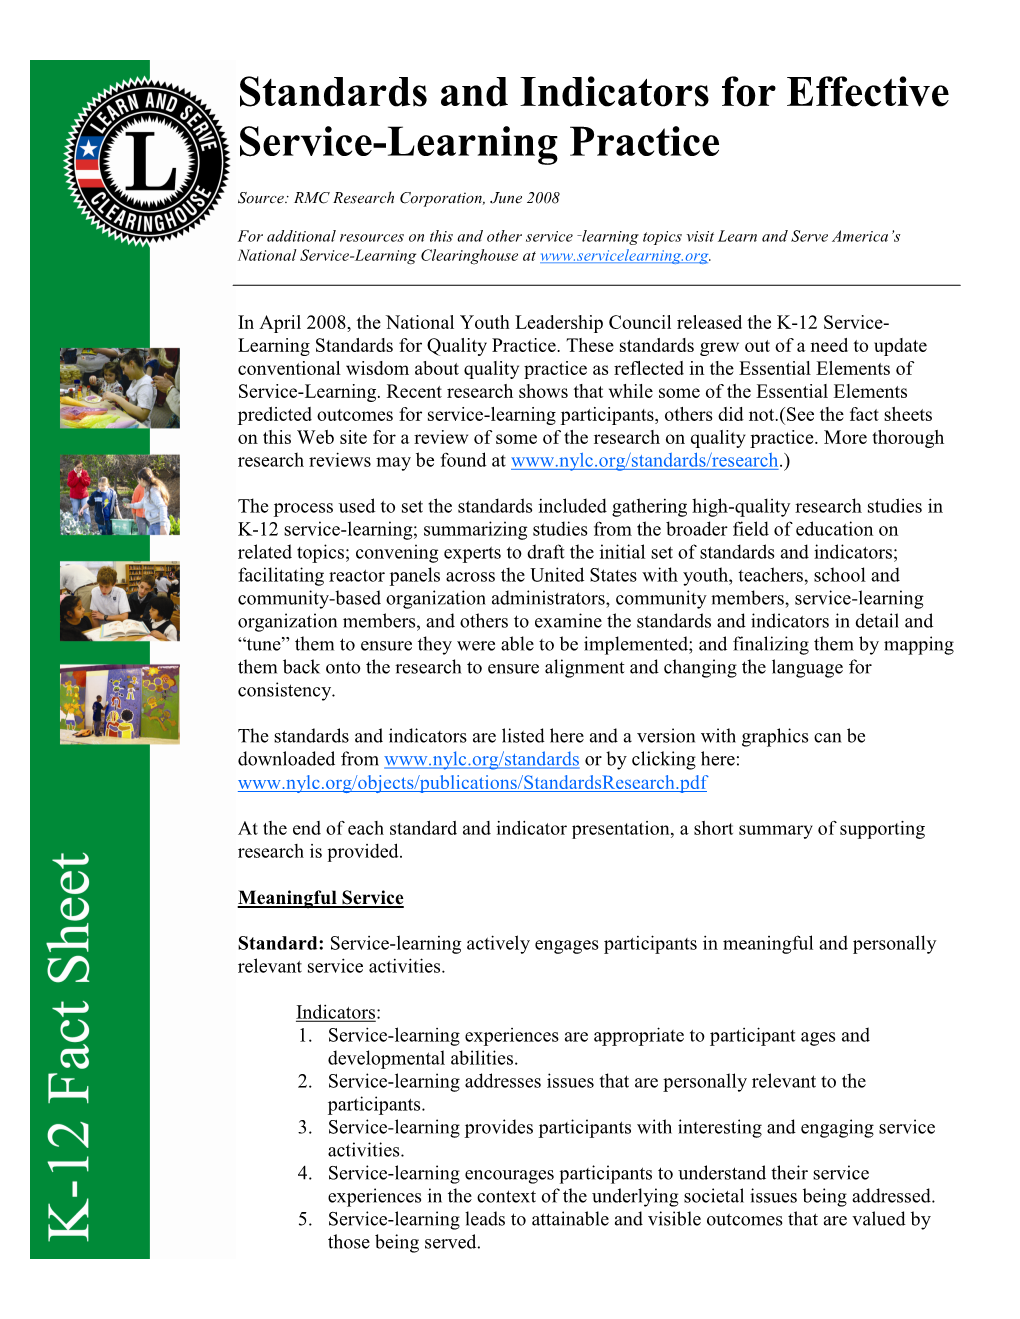 Standards and Indicators for Effective Service-Learning Practice